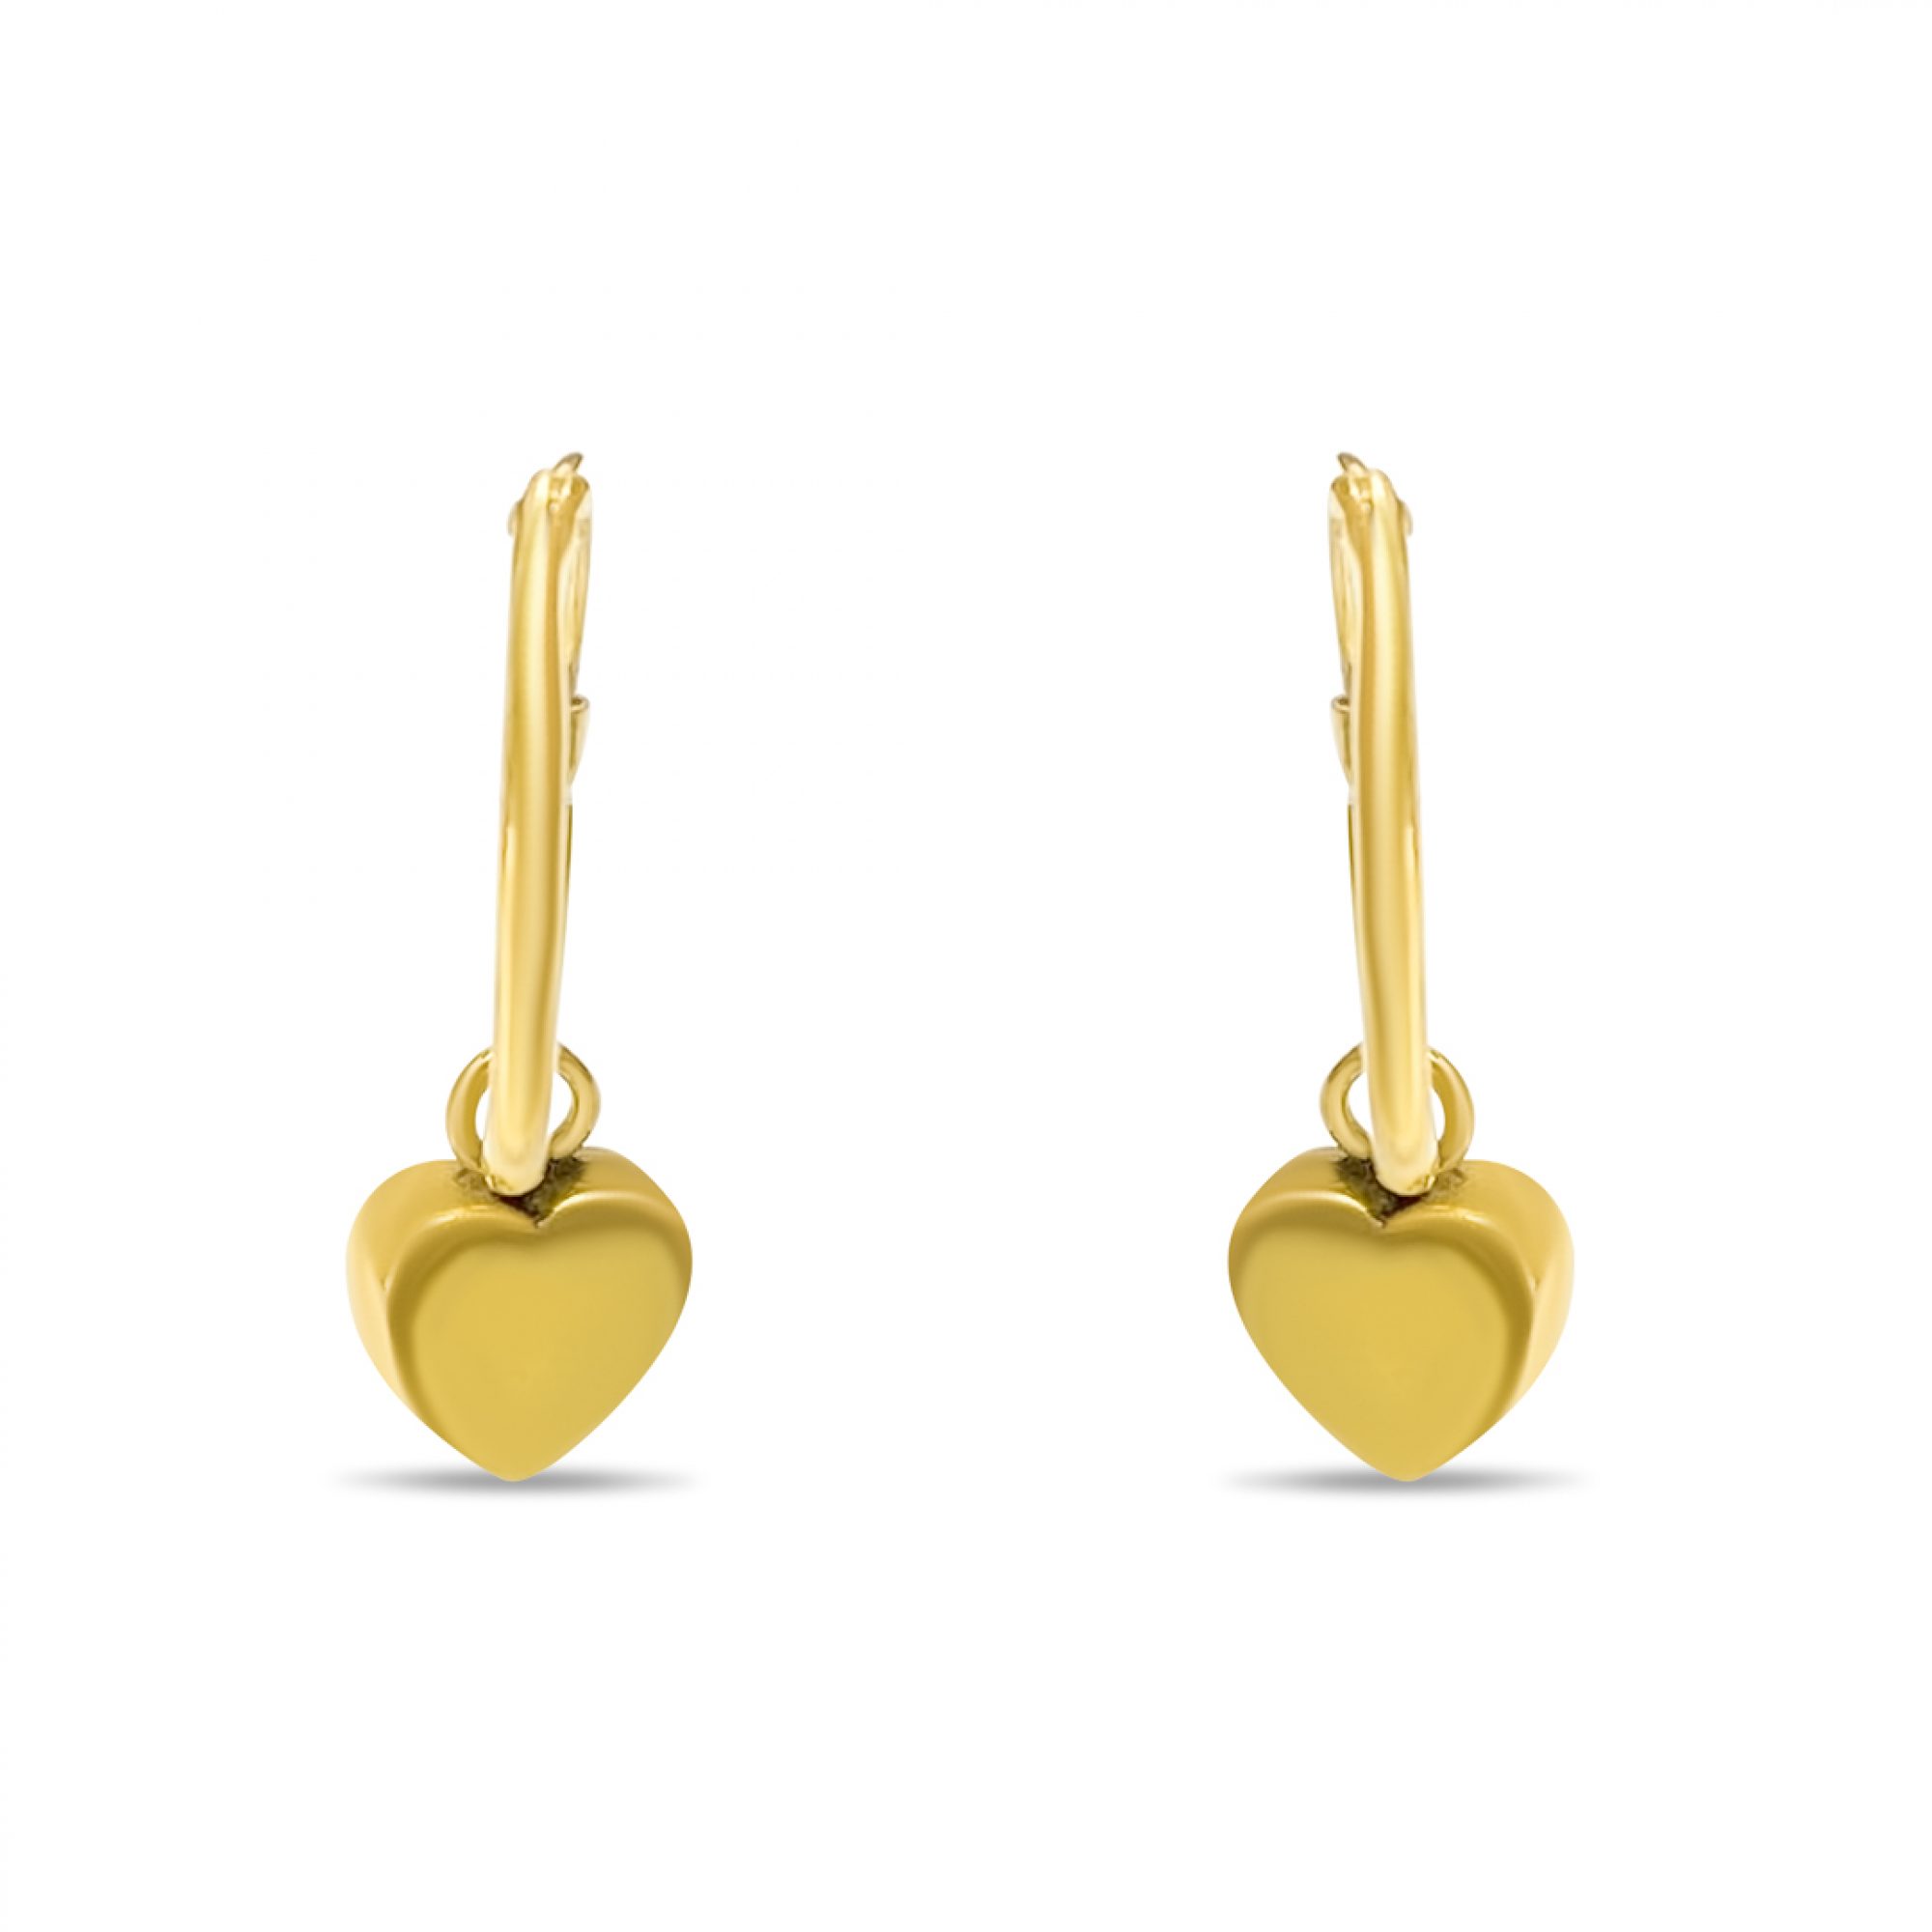 Gold plated earrings with dangle heart